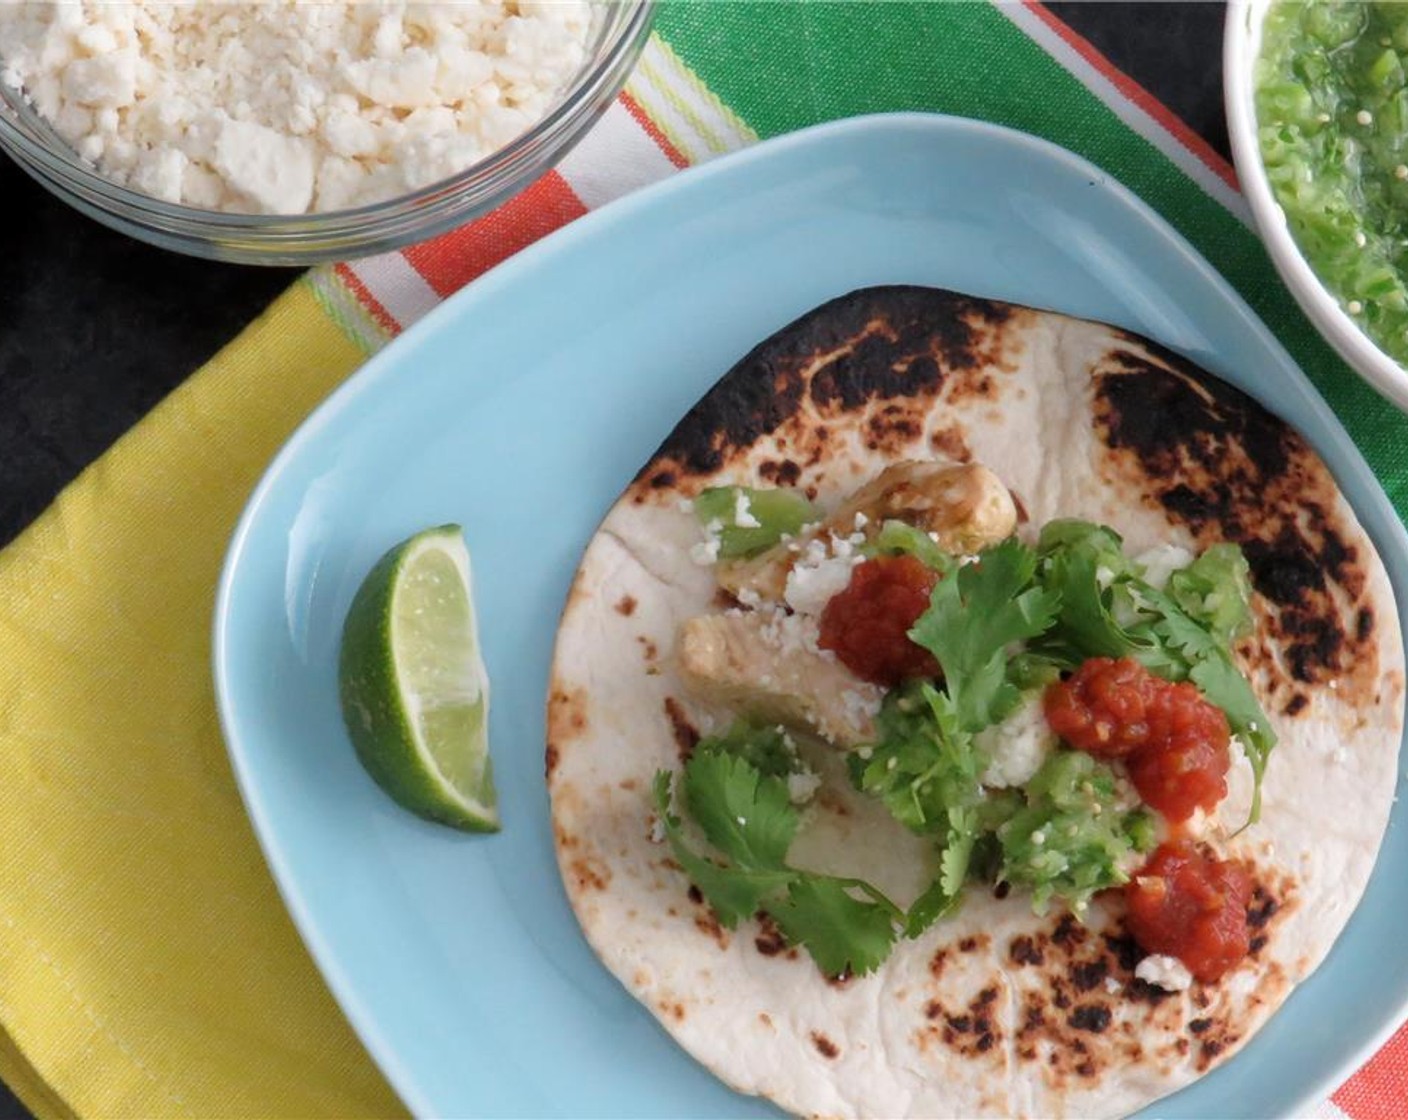 step 12 To serve: Place a few strips of chicken in a tortilla. Top with sliced onion and poblano peppers, tomatillo salsa, Queso Fresco (to taste), cilantro, and a squeeze of lime.